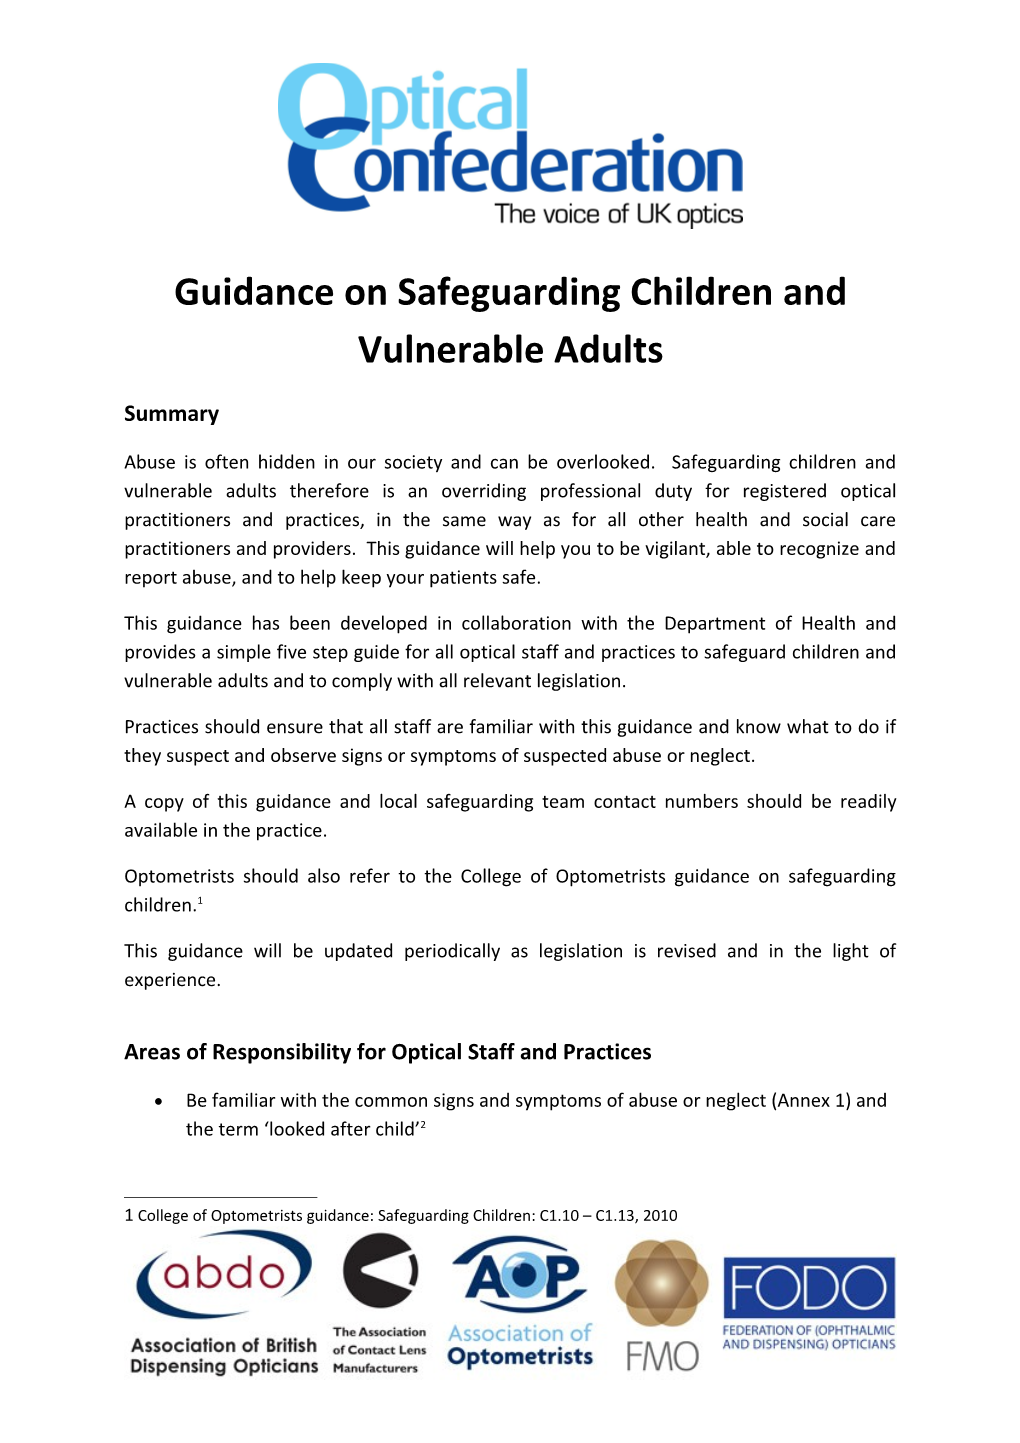 Guidance on Safeguarding Children and Vulnerable Adults